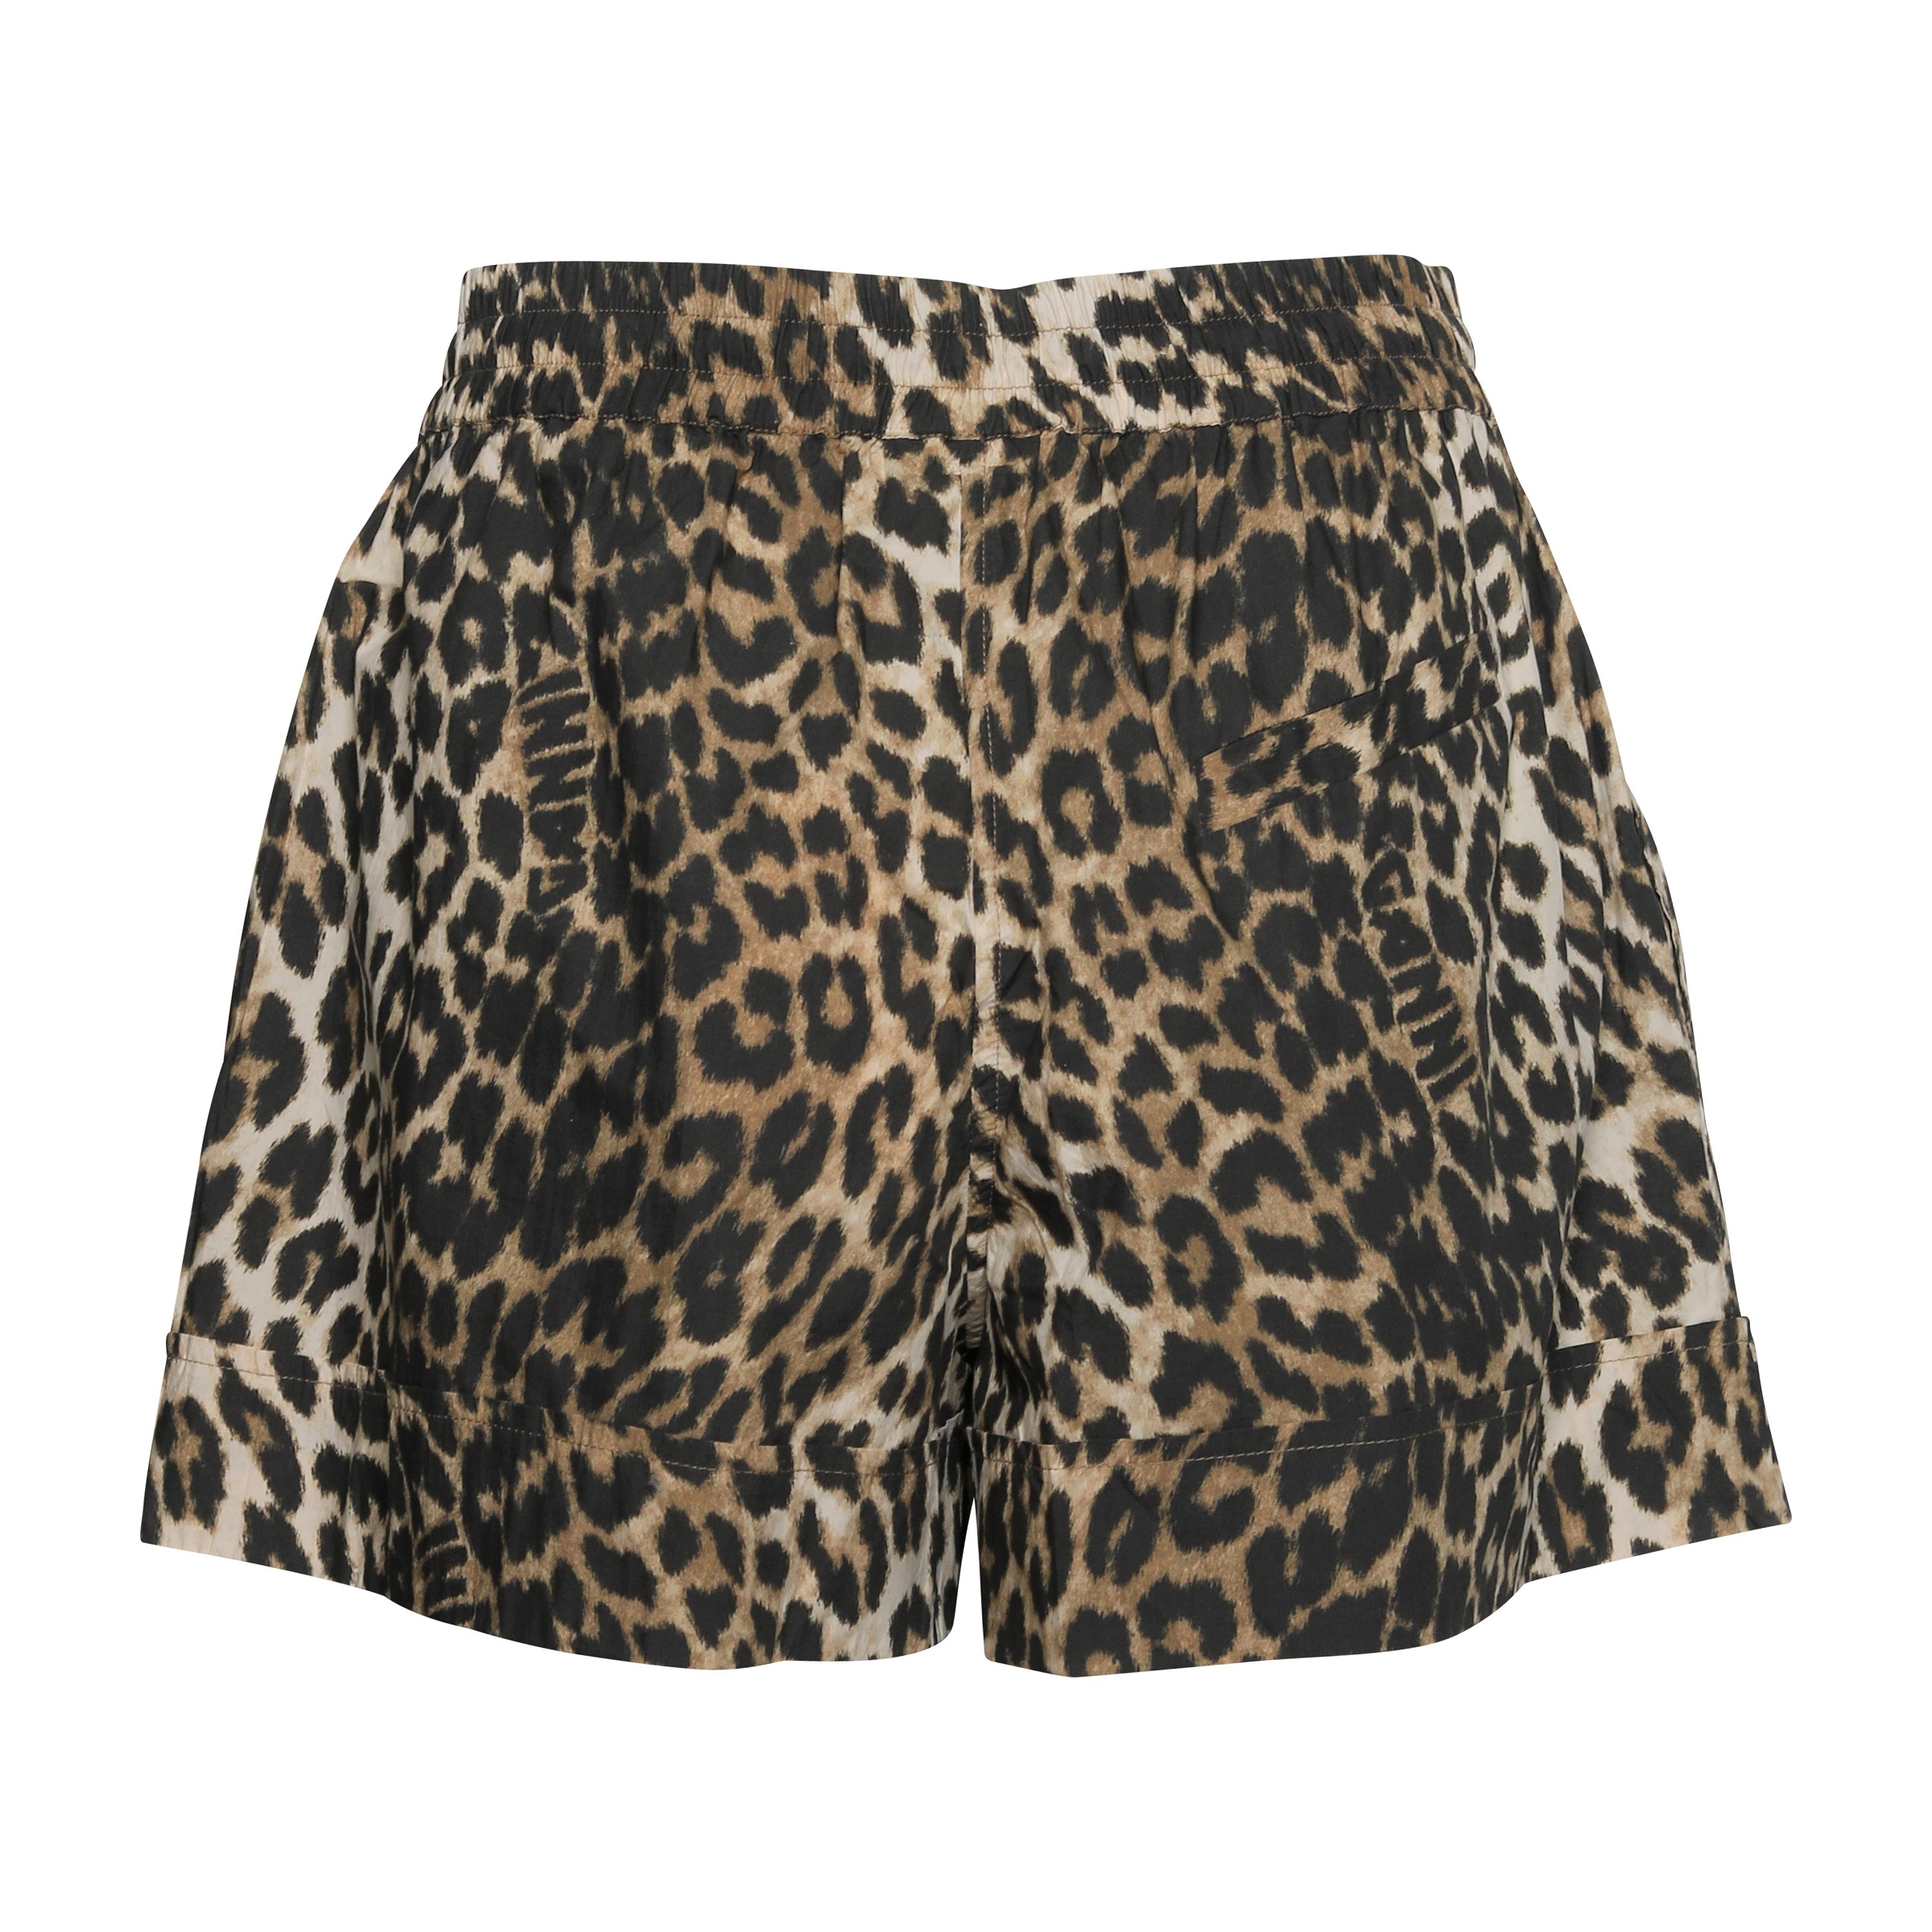 GANNI Printed Cotton Elasticated Shorts in Leopard 38